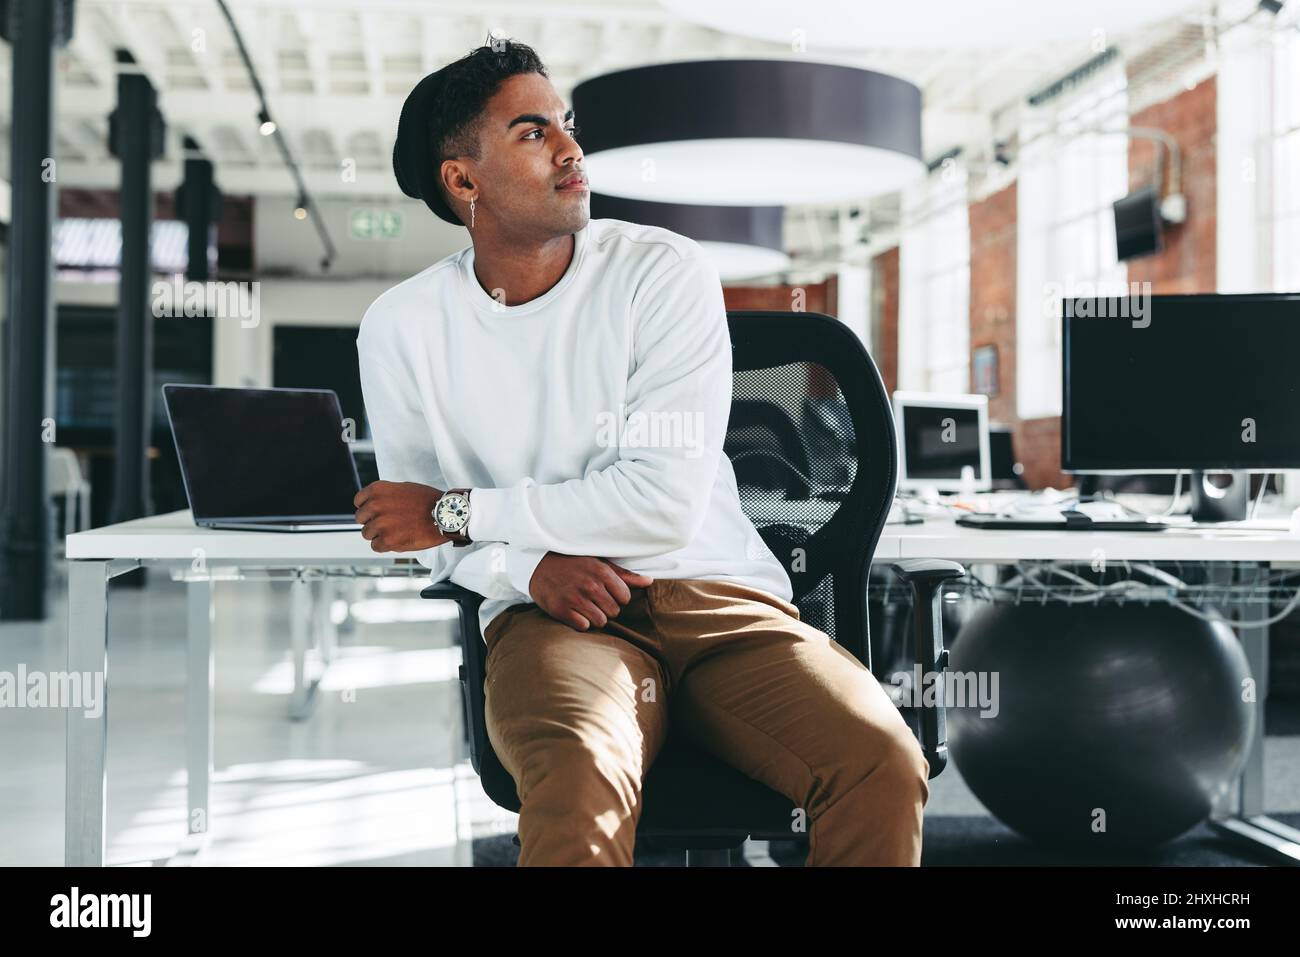 Thinking of new software ideas. Creative businessman looking away thoughtfully while sitting alone in a modern workplace. Young software developer tak Stock Photo